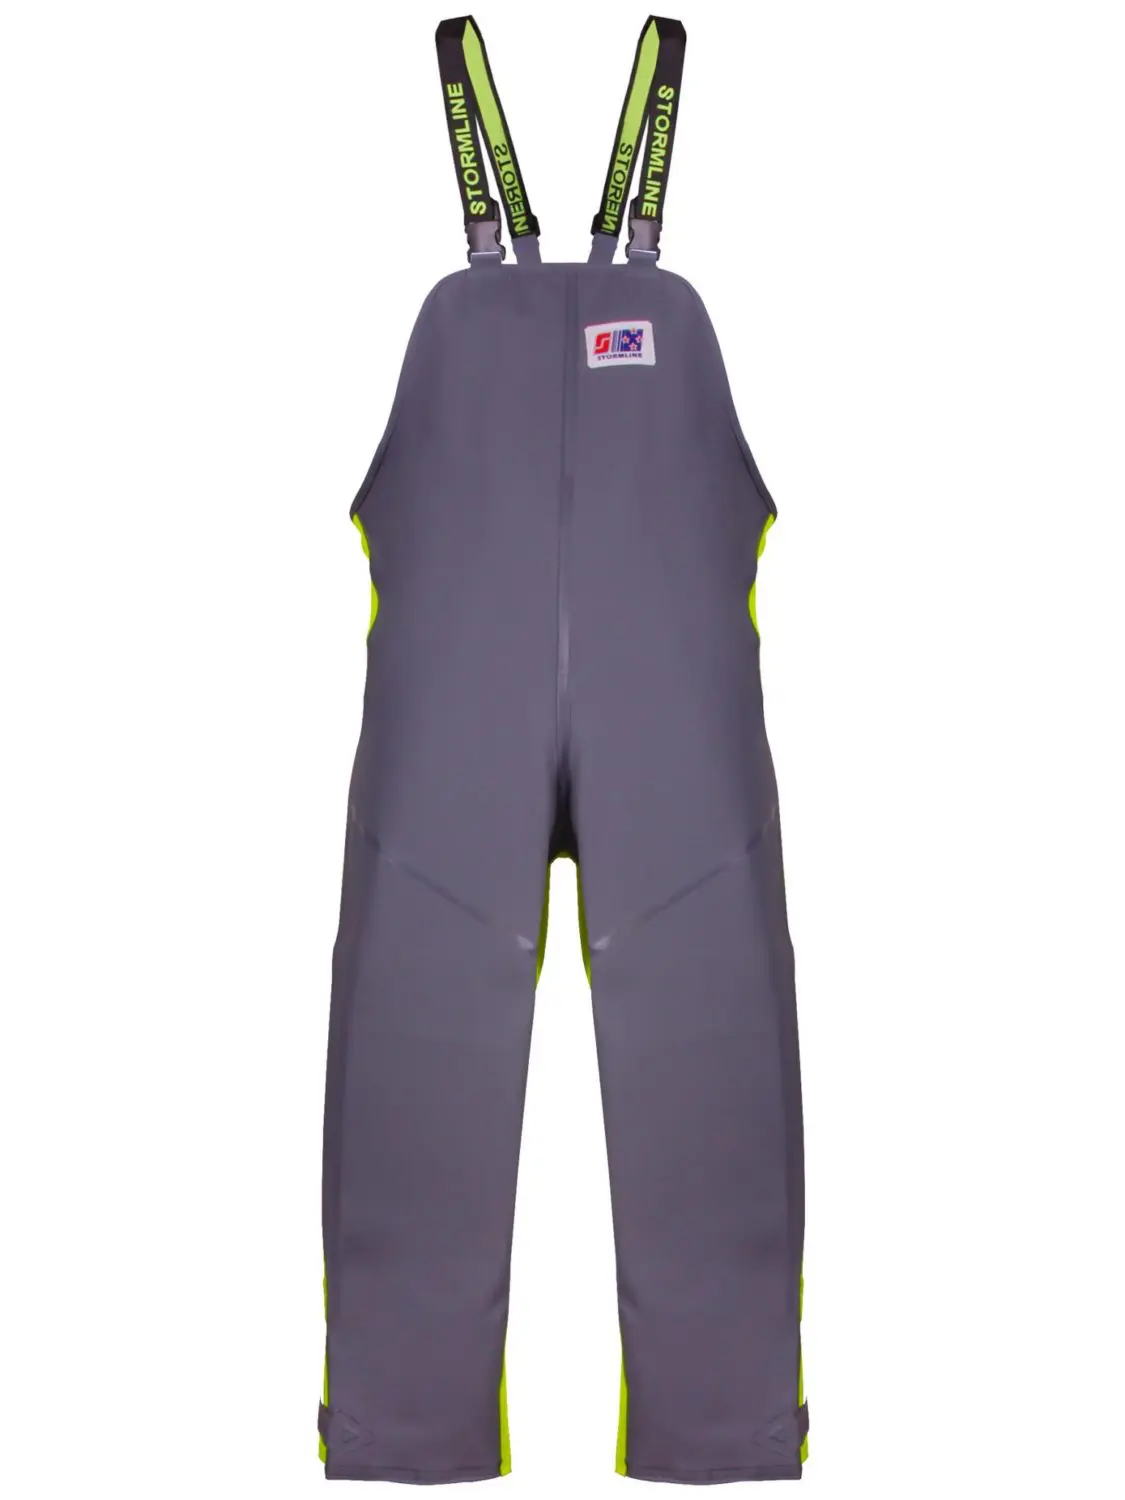 Fishing Shorts & Pants - Outdoor Insiders New Milford PA